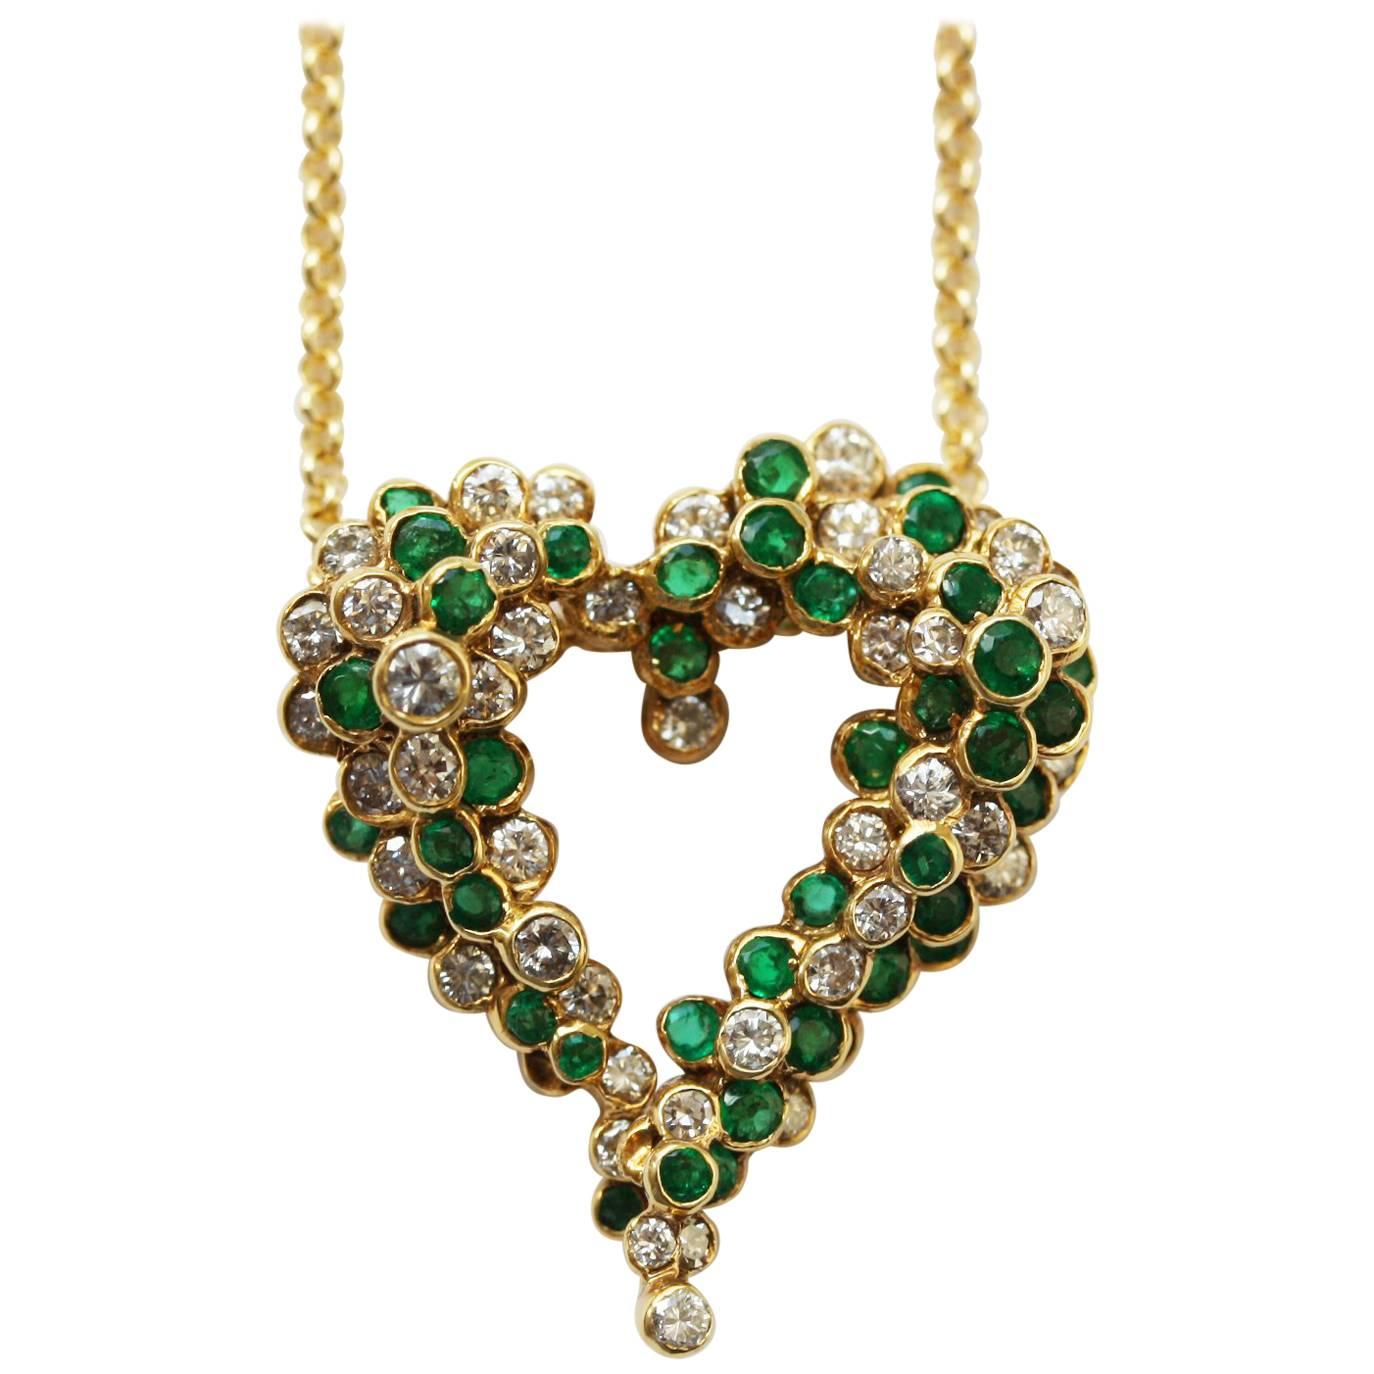 Vintage Heart-Shaped Pendant with Diamonds and Emeralds